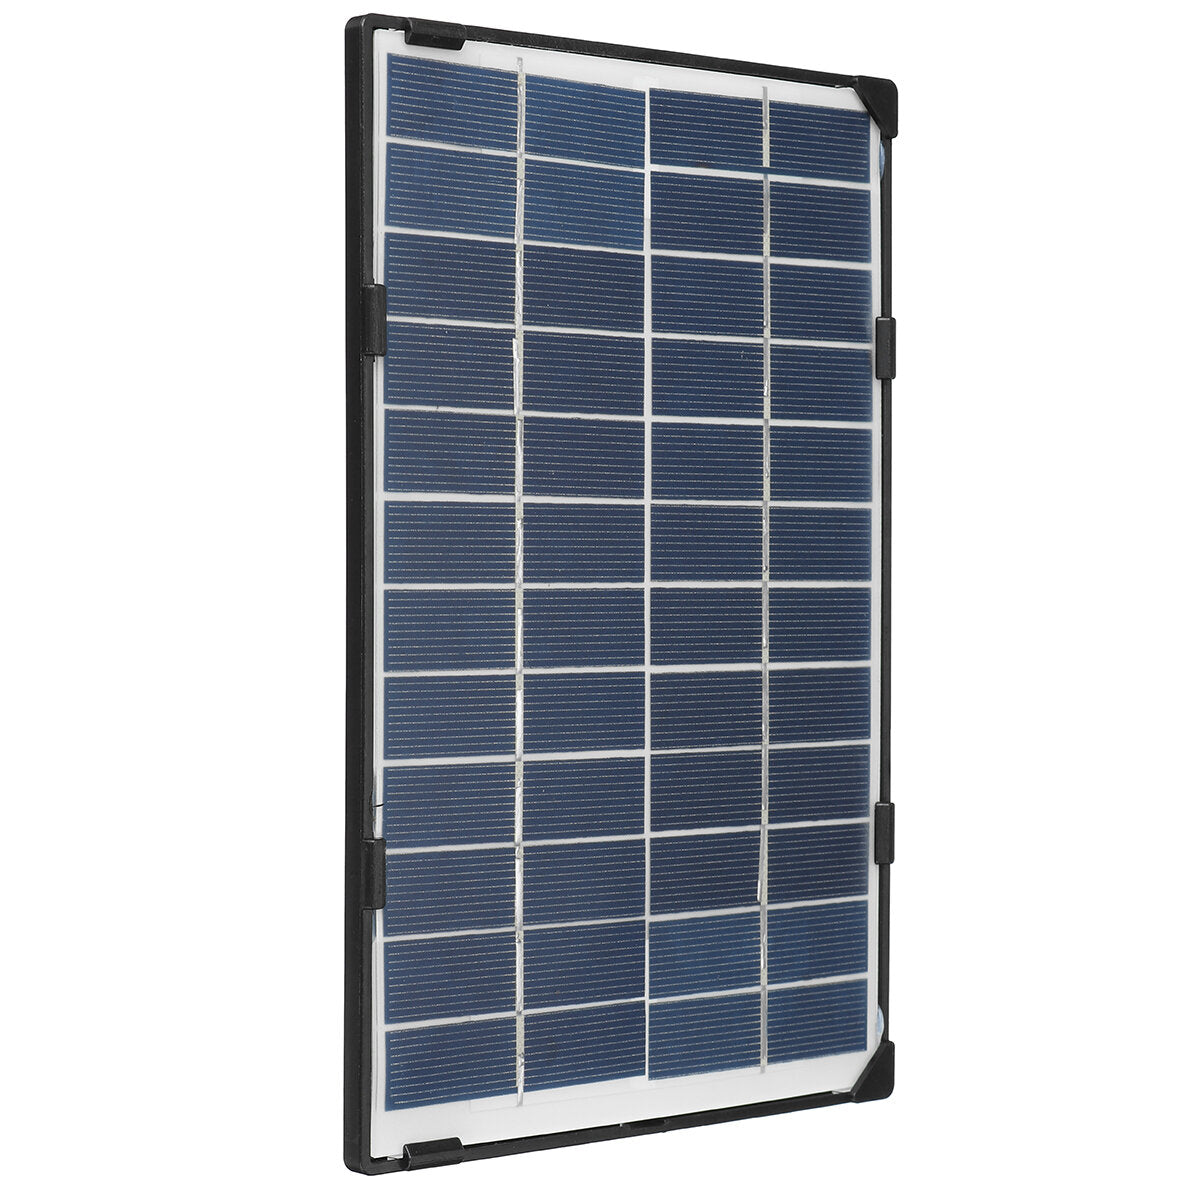 12V Foldable Solar Panel Charger Camping Solar Power Bank USB Backpacking Power with 3m Cable